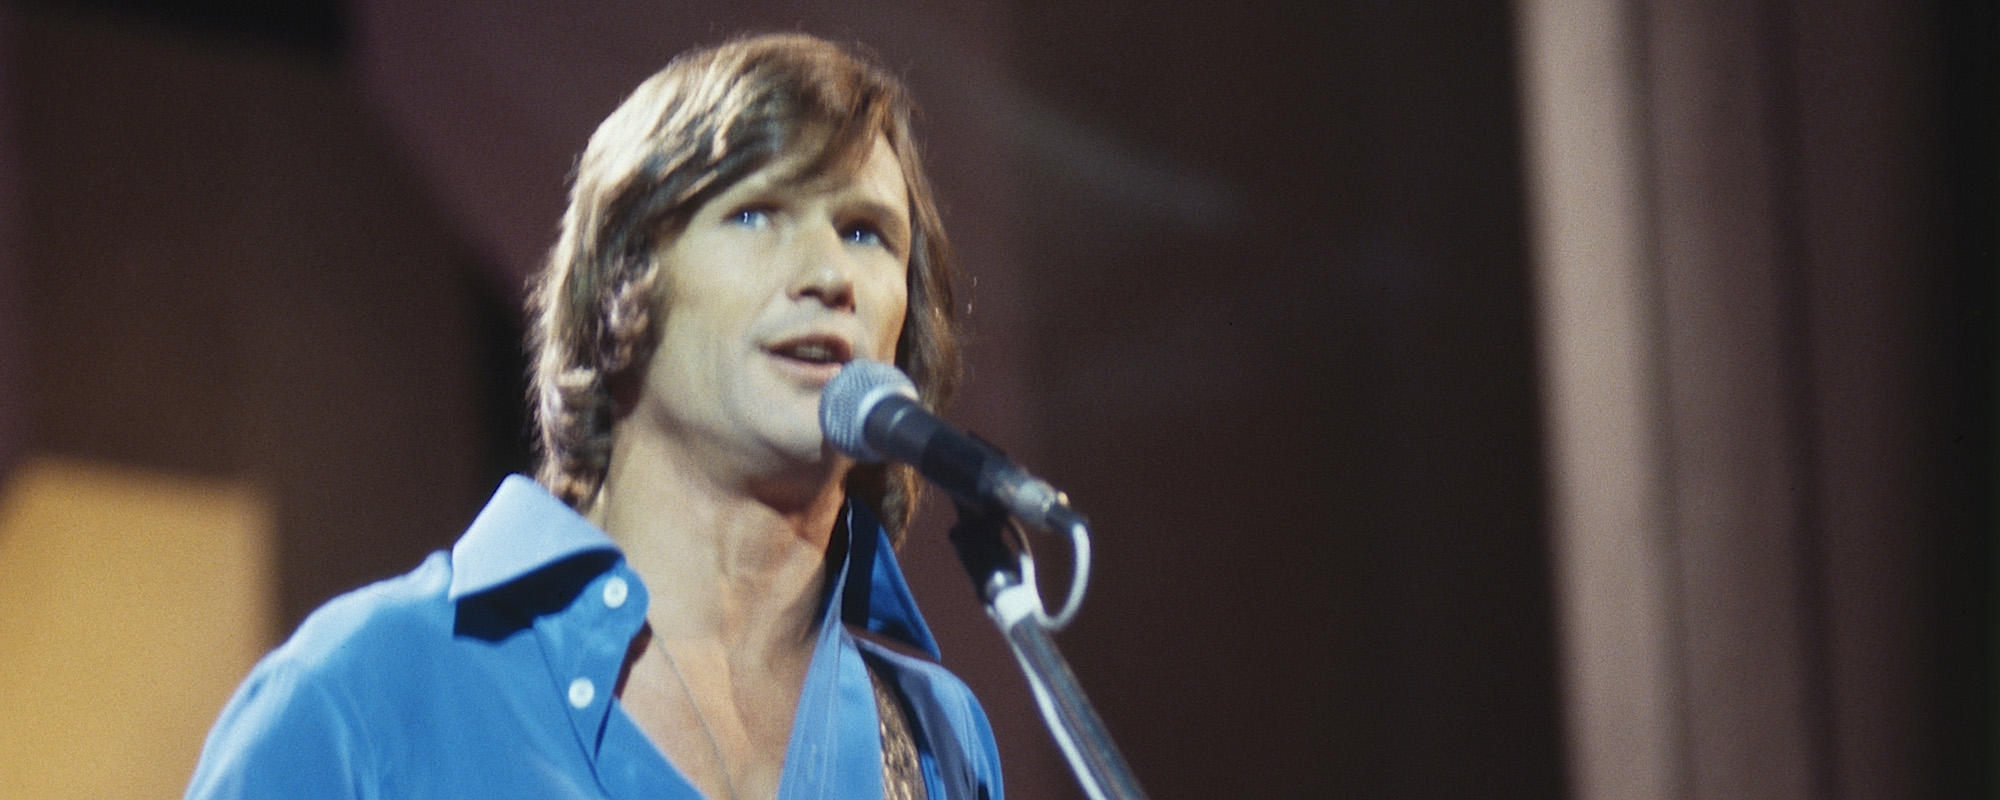 The Epiphany Kris Kristofferson Had Before Writing His First No. 1 as a Solo Artist, “Why Me”